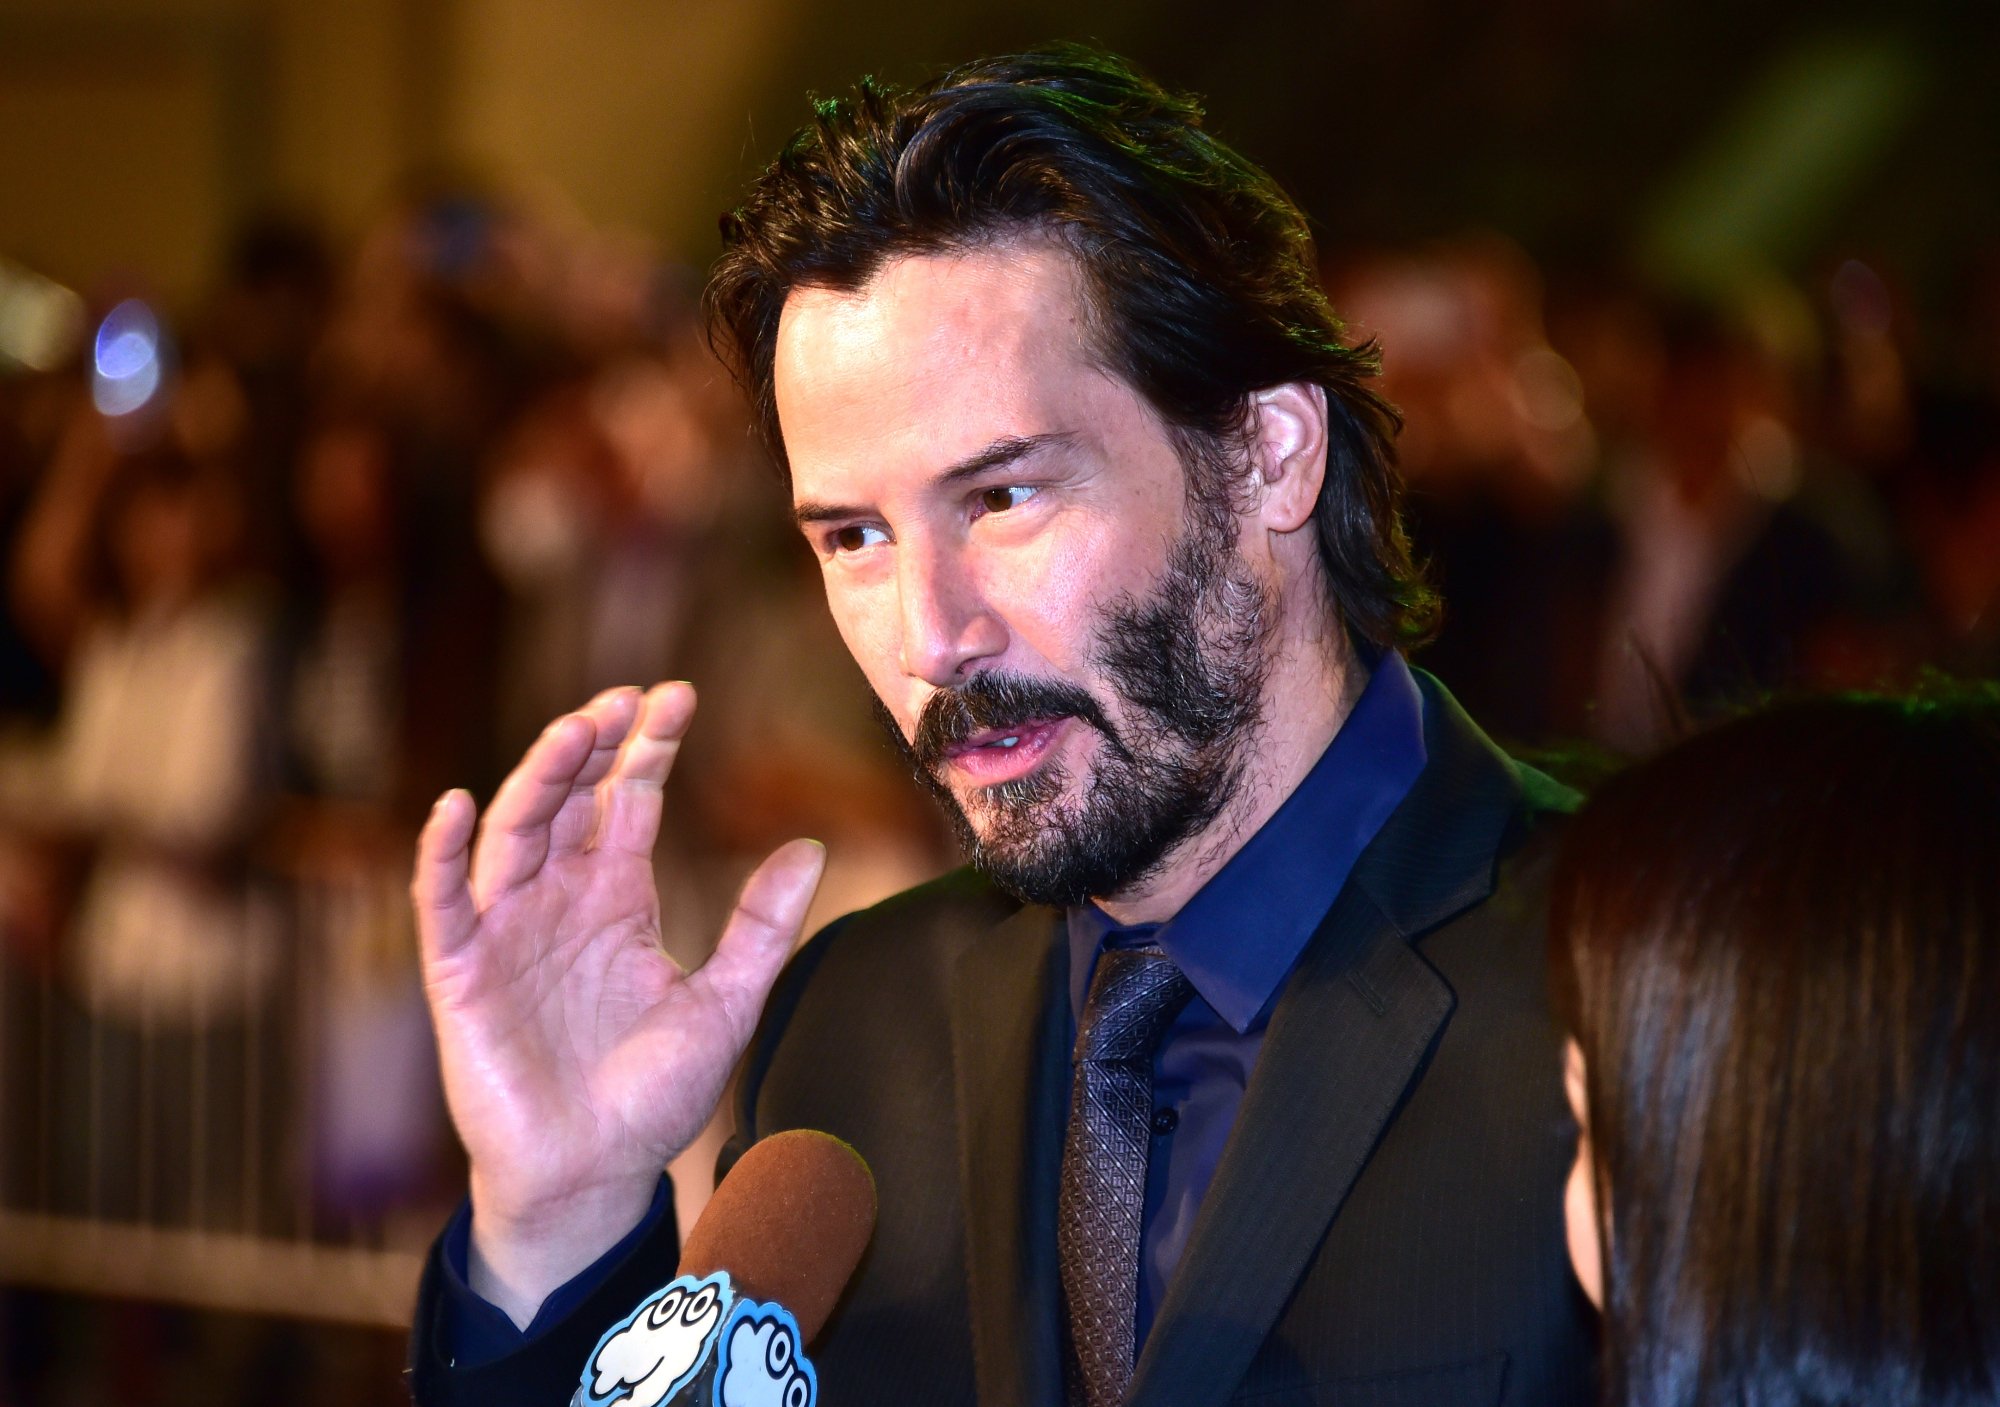 'John Wick' actor Keanu Reeves wearing a black suit holding his hand up while talking